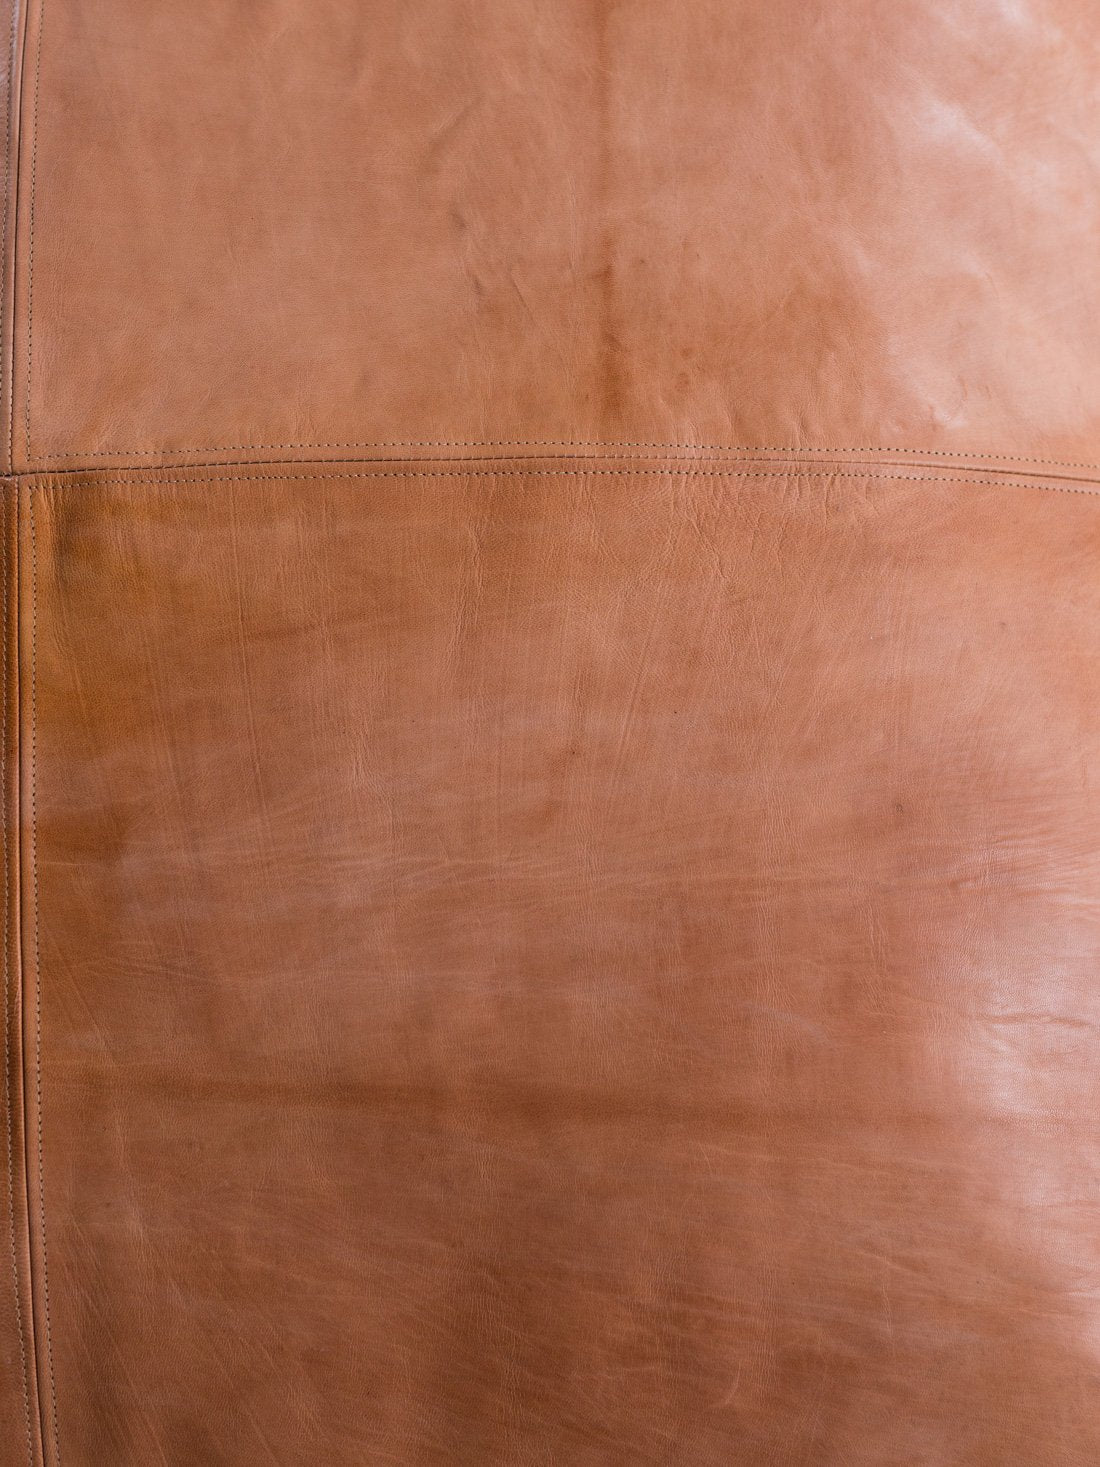 Special listing for Leather Ottoman in Tan